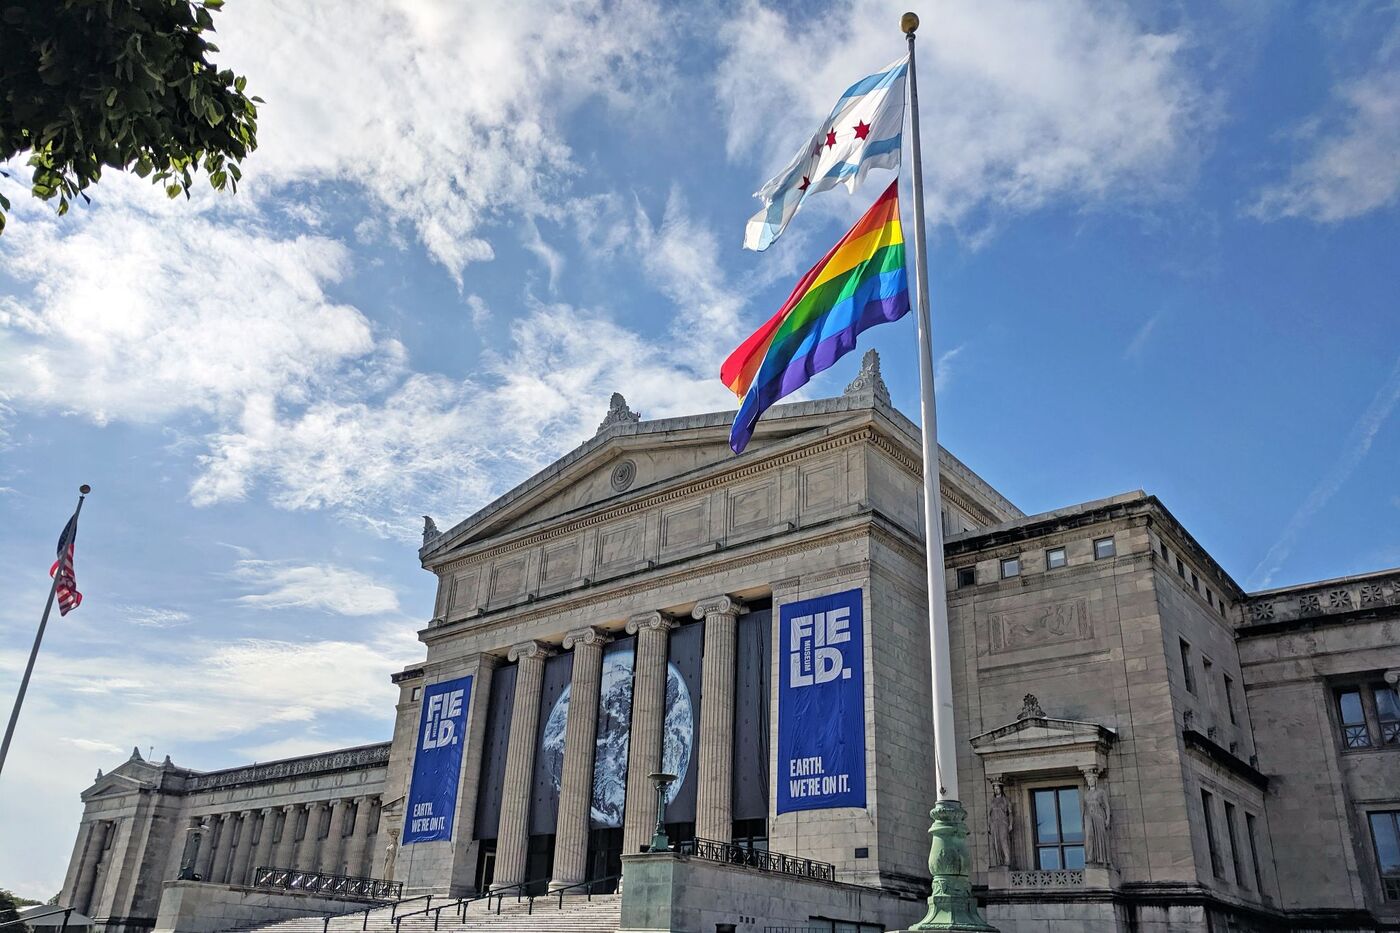 museum exterior, showing Chicago and Pride flags